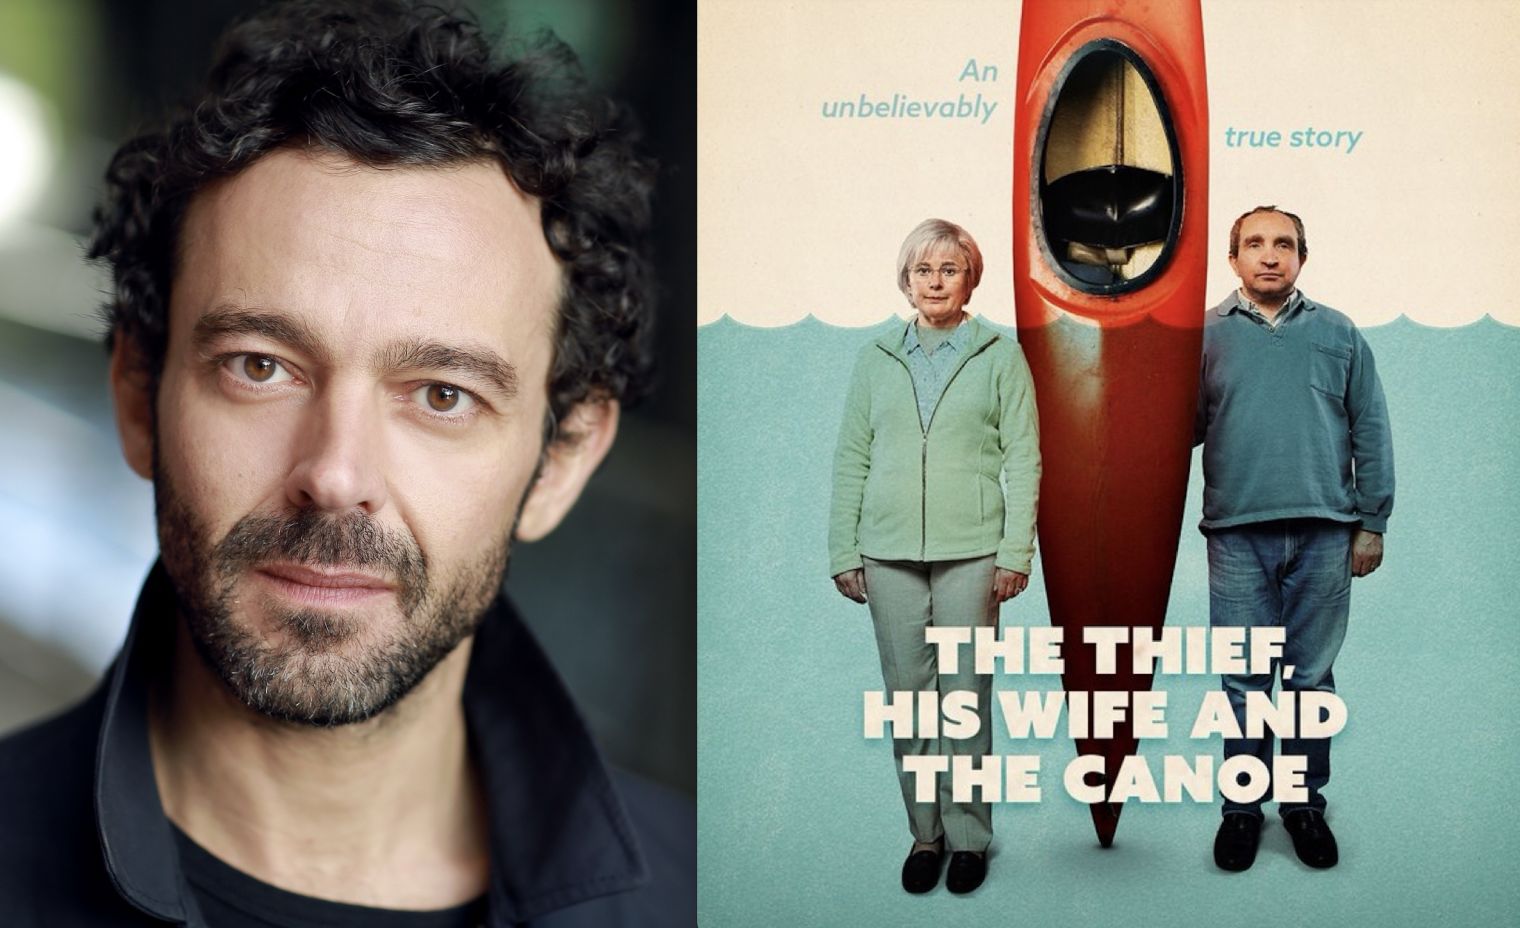 Catch Milo Twomey in tonight's episode of The Thief, His Wife and The Canoe on ITV at 9pm